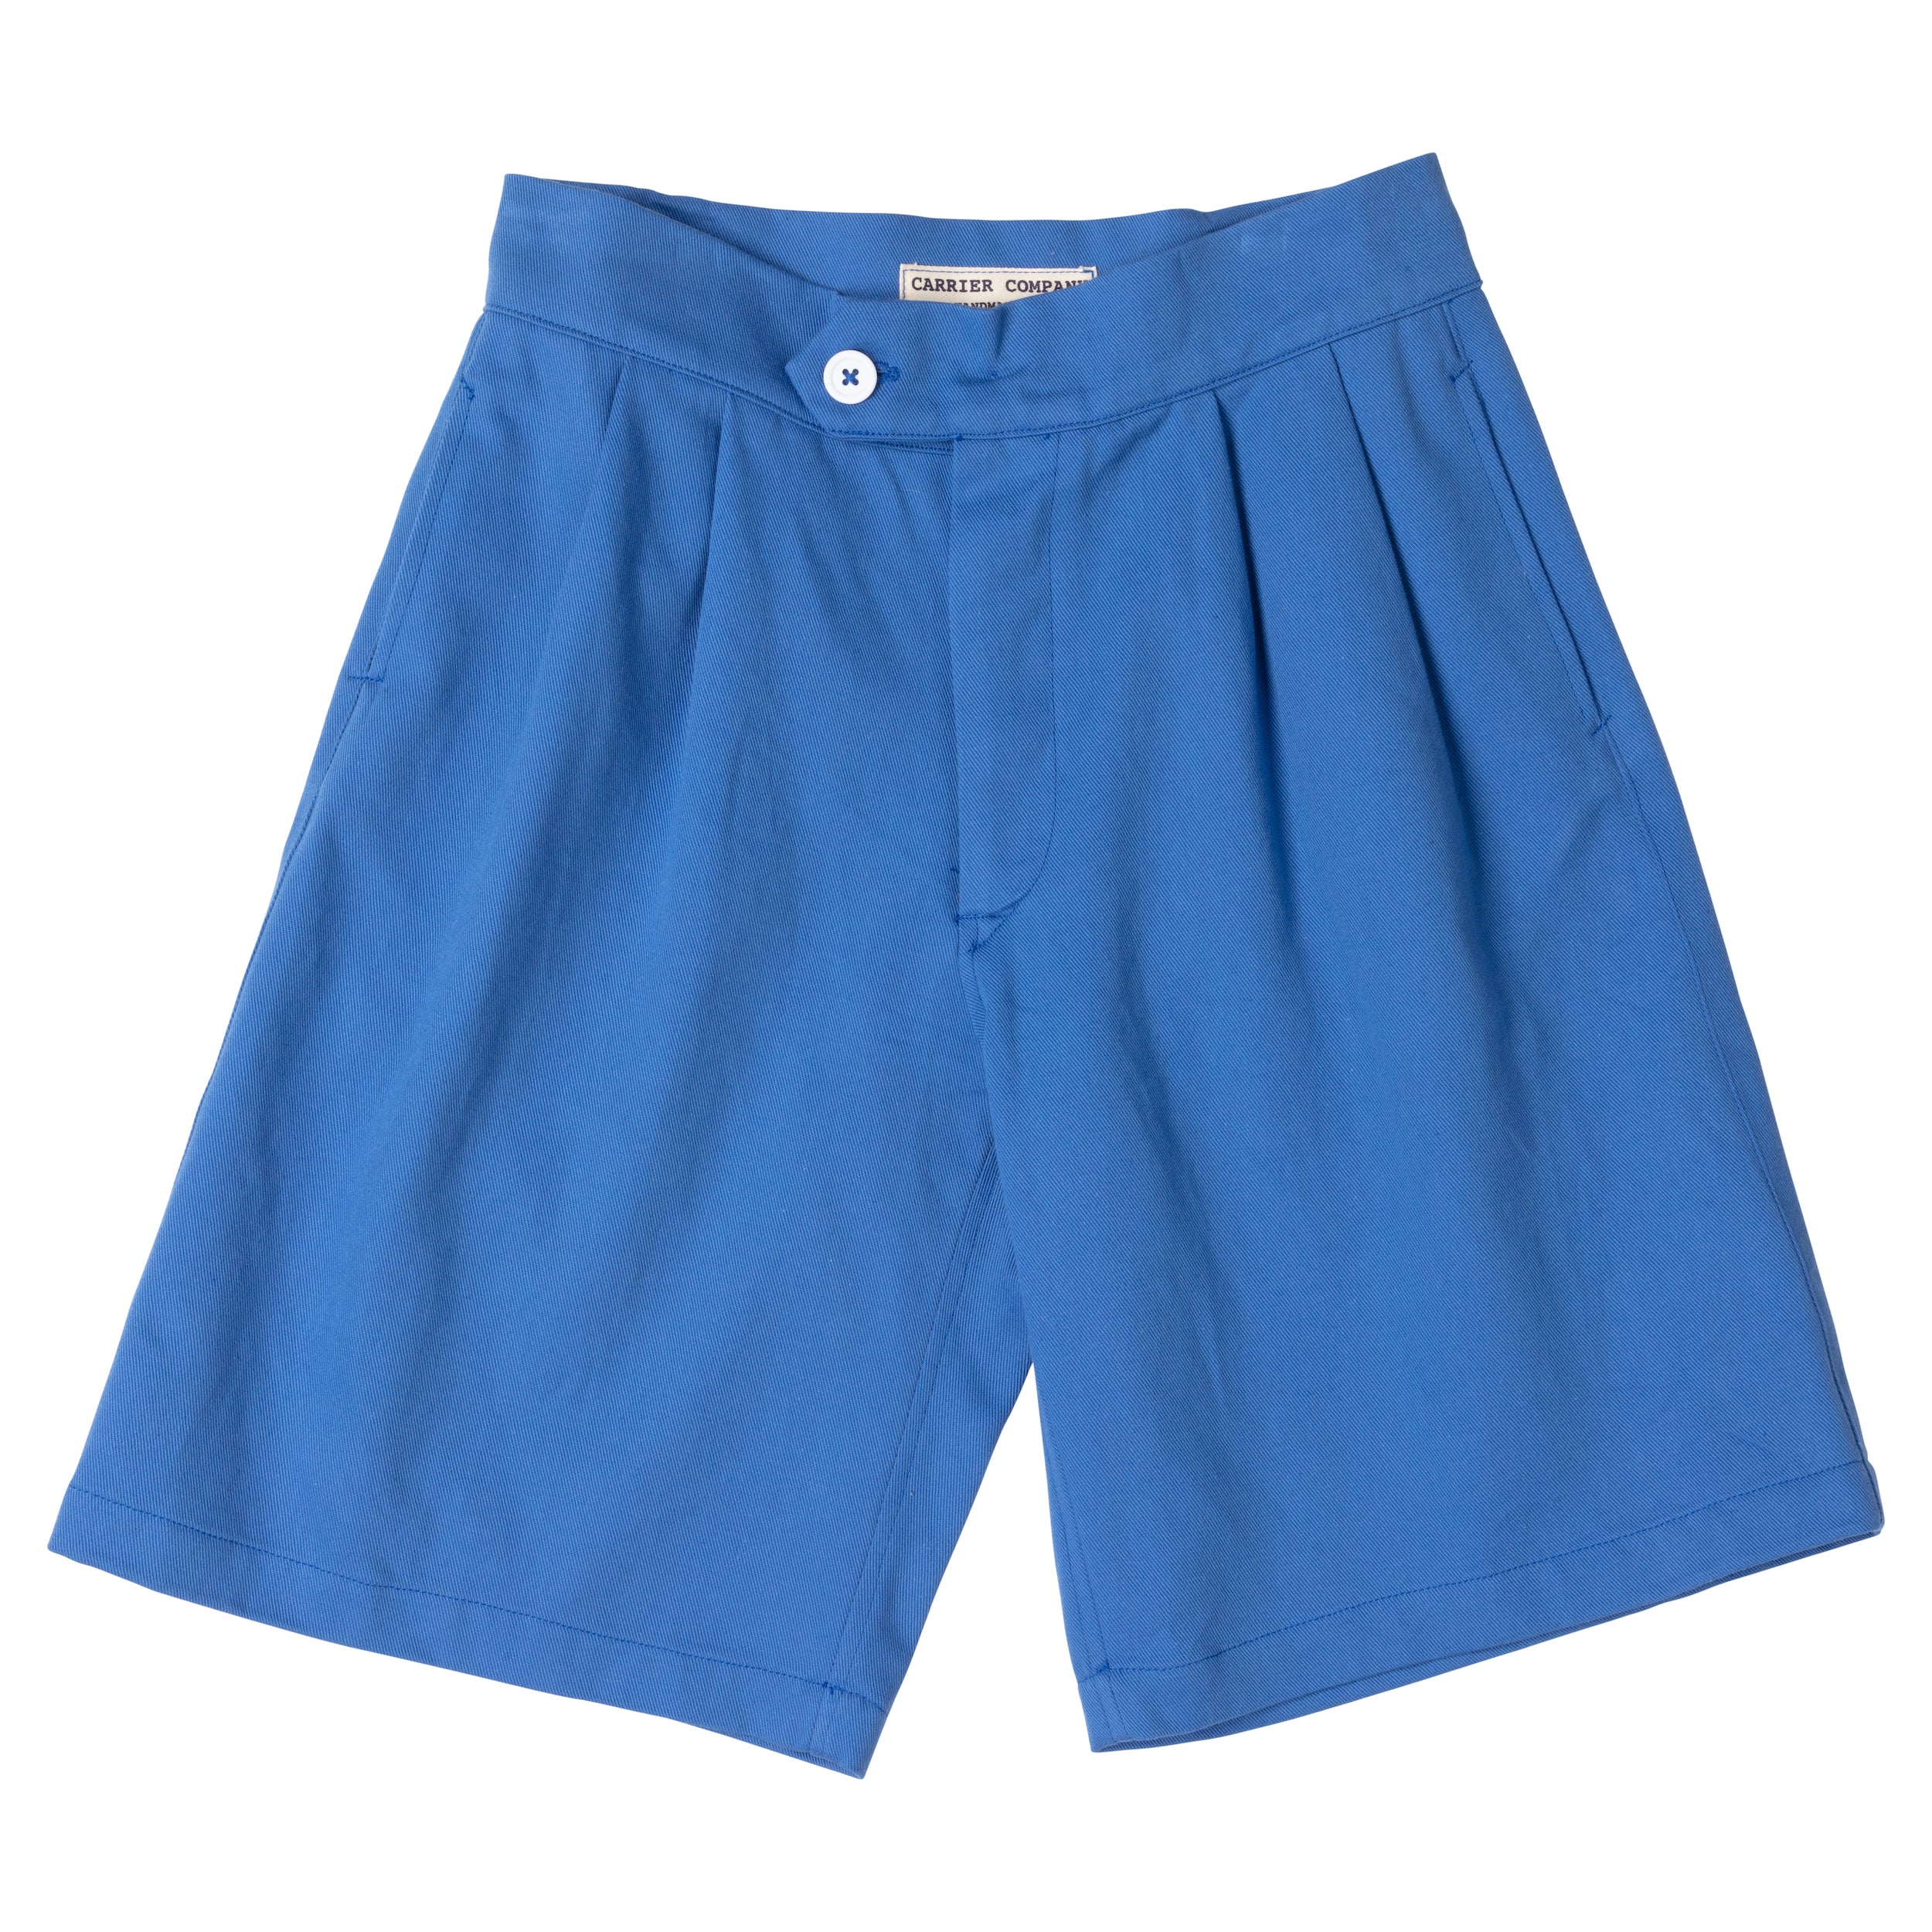 Carrier Company Ladies Shorts in Norfolk Sky Blue